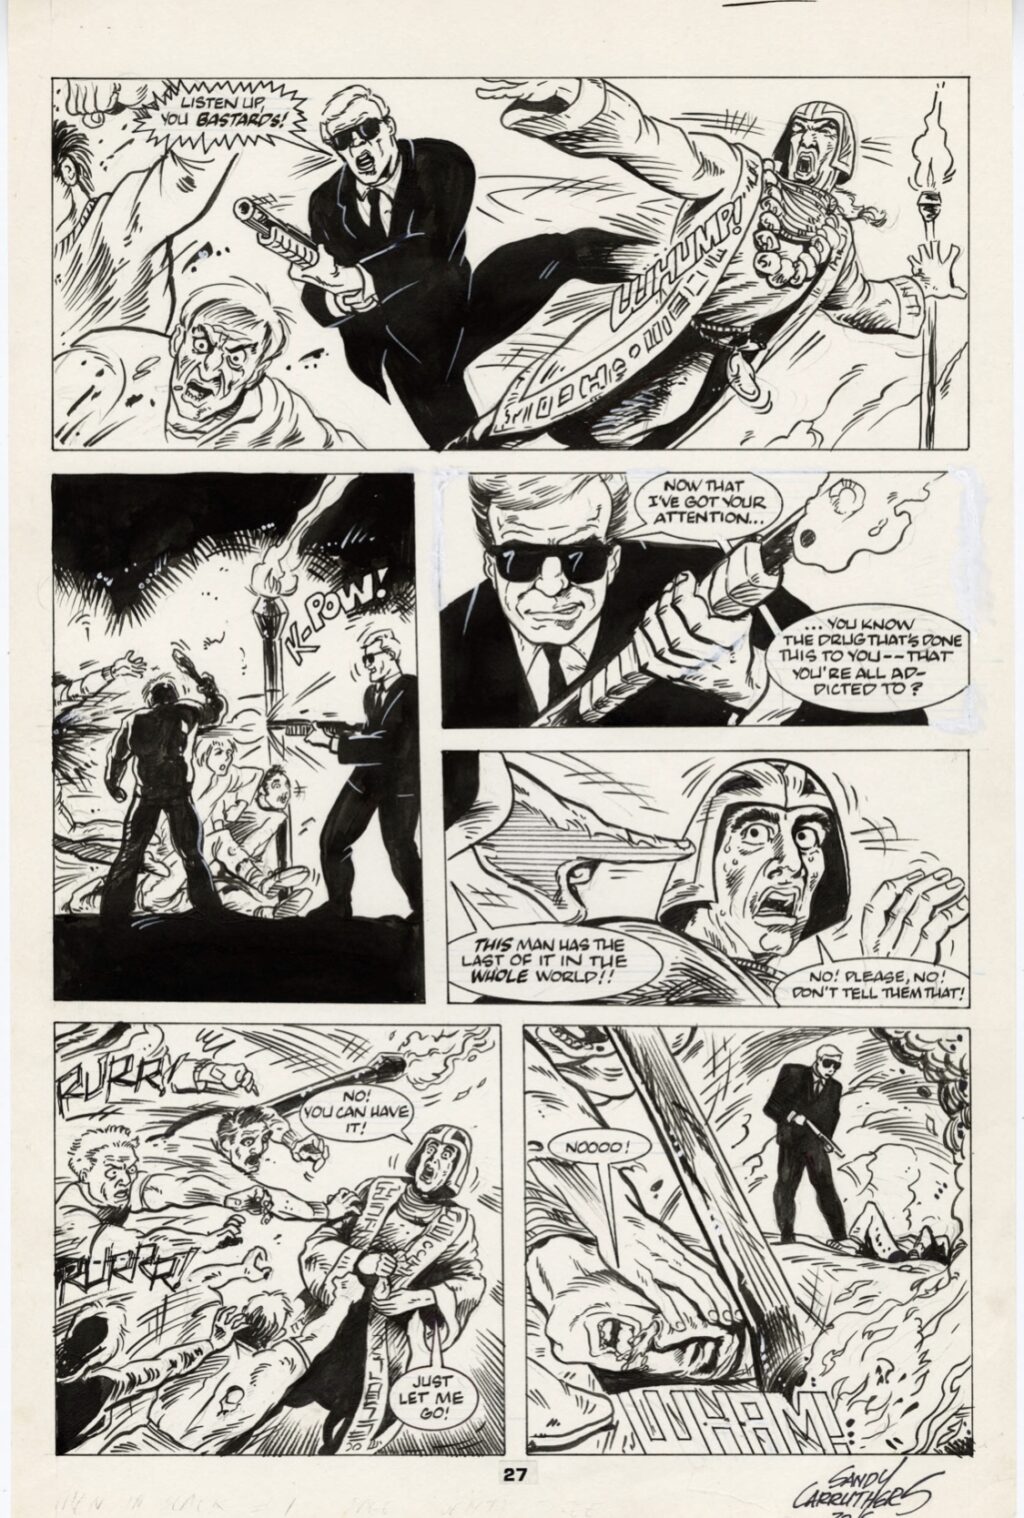 Men In Black issue 1 page 27 by Sandy Carruthers